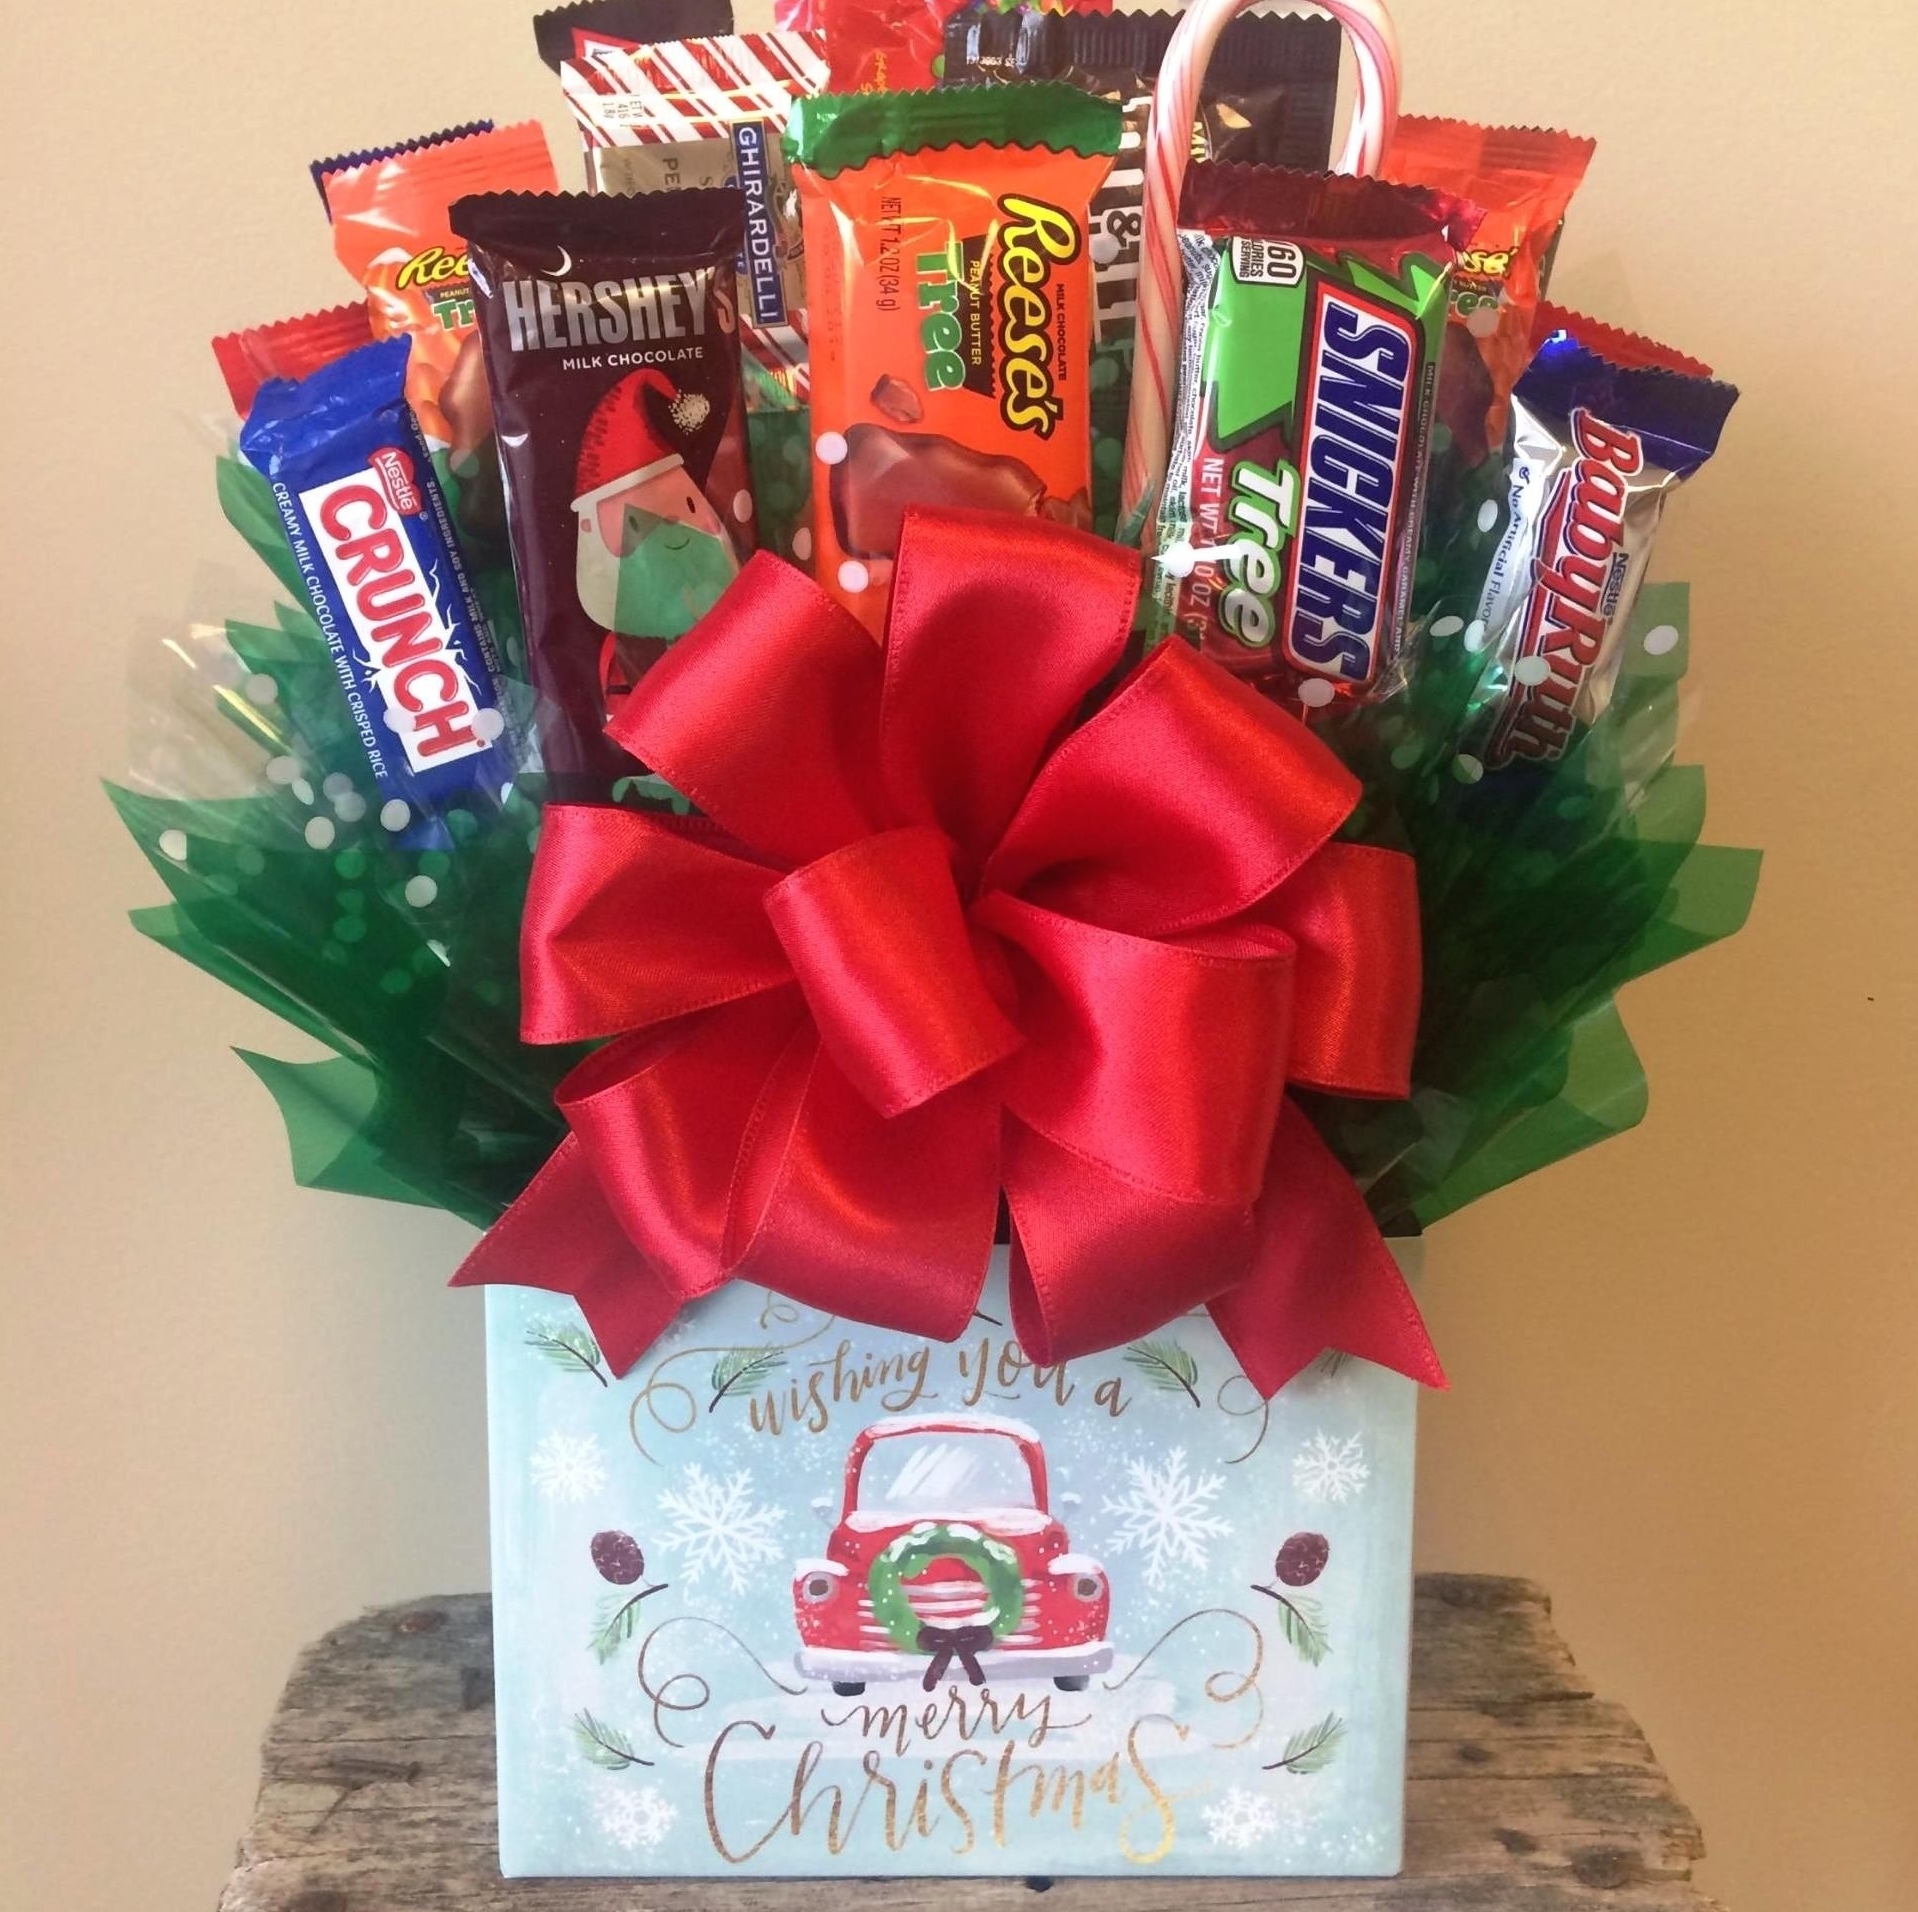 Merry Christmas Candy Gift Box Bouquet | Holiday Candy Bouquet | Arttowngifts.com